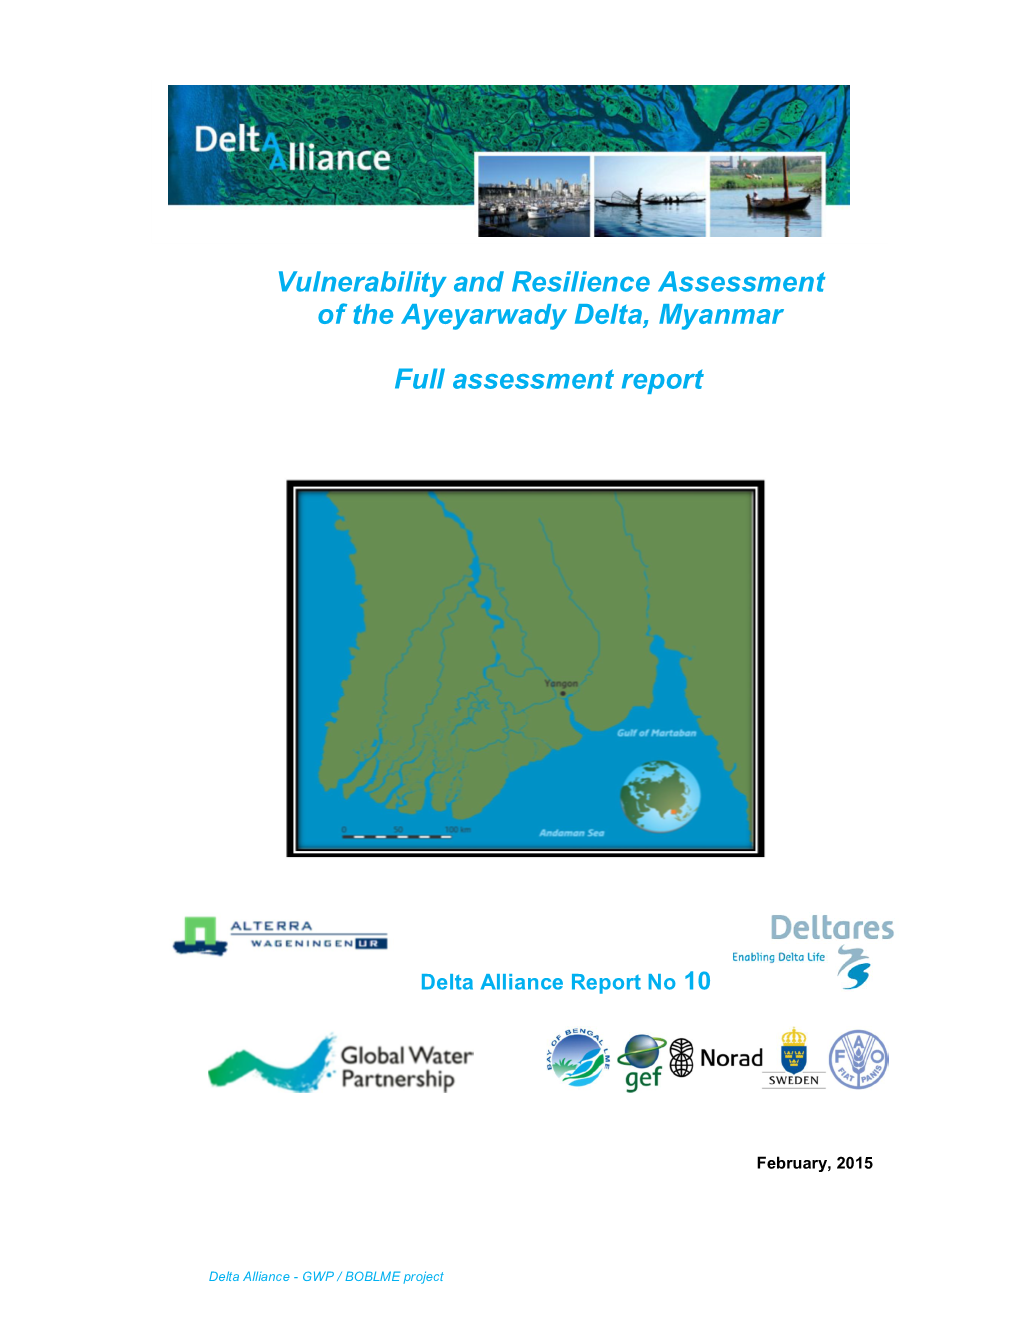 Vulne Vulnerability and Resilience Assessment of the Ayeyarwady